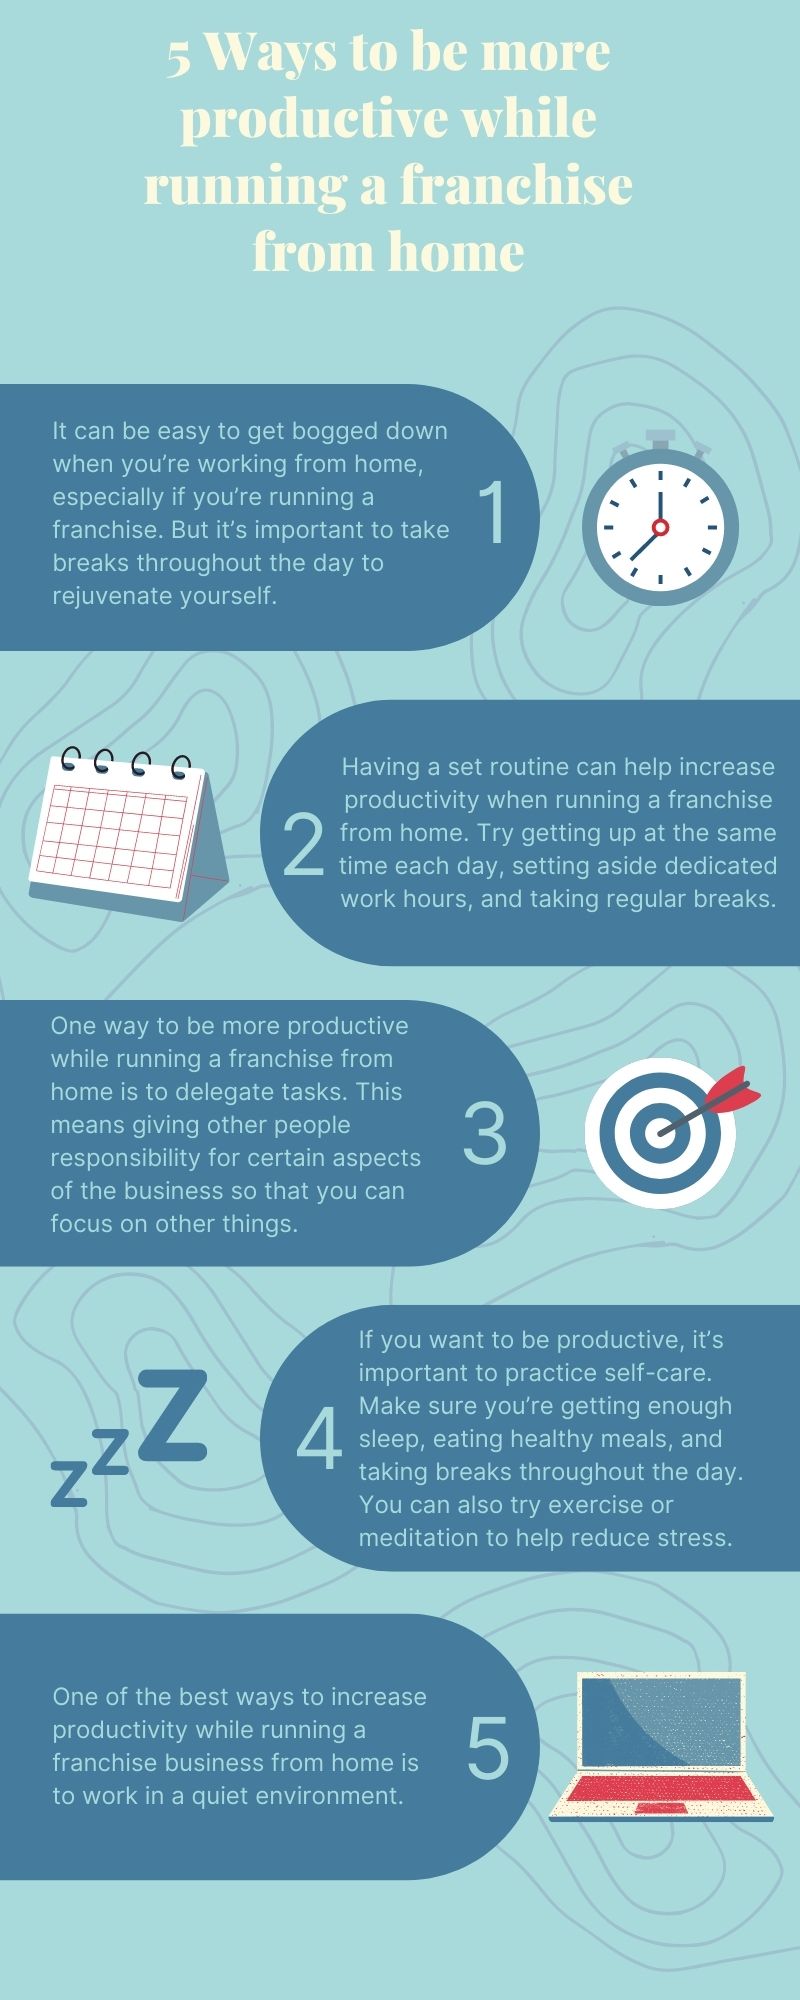 5 Ways to be more productive while running a franchise from home